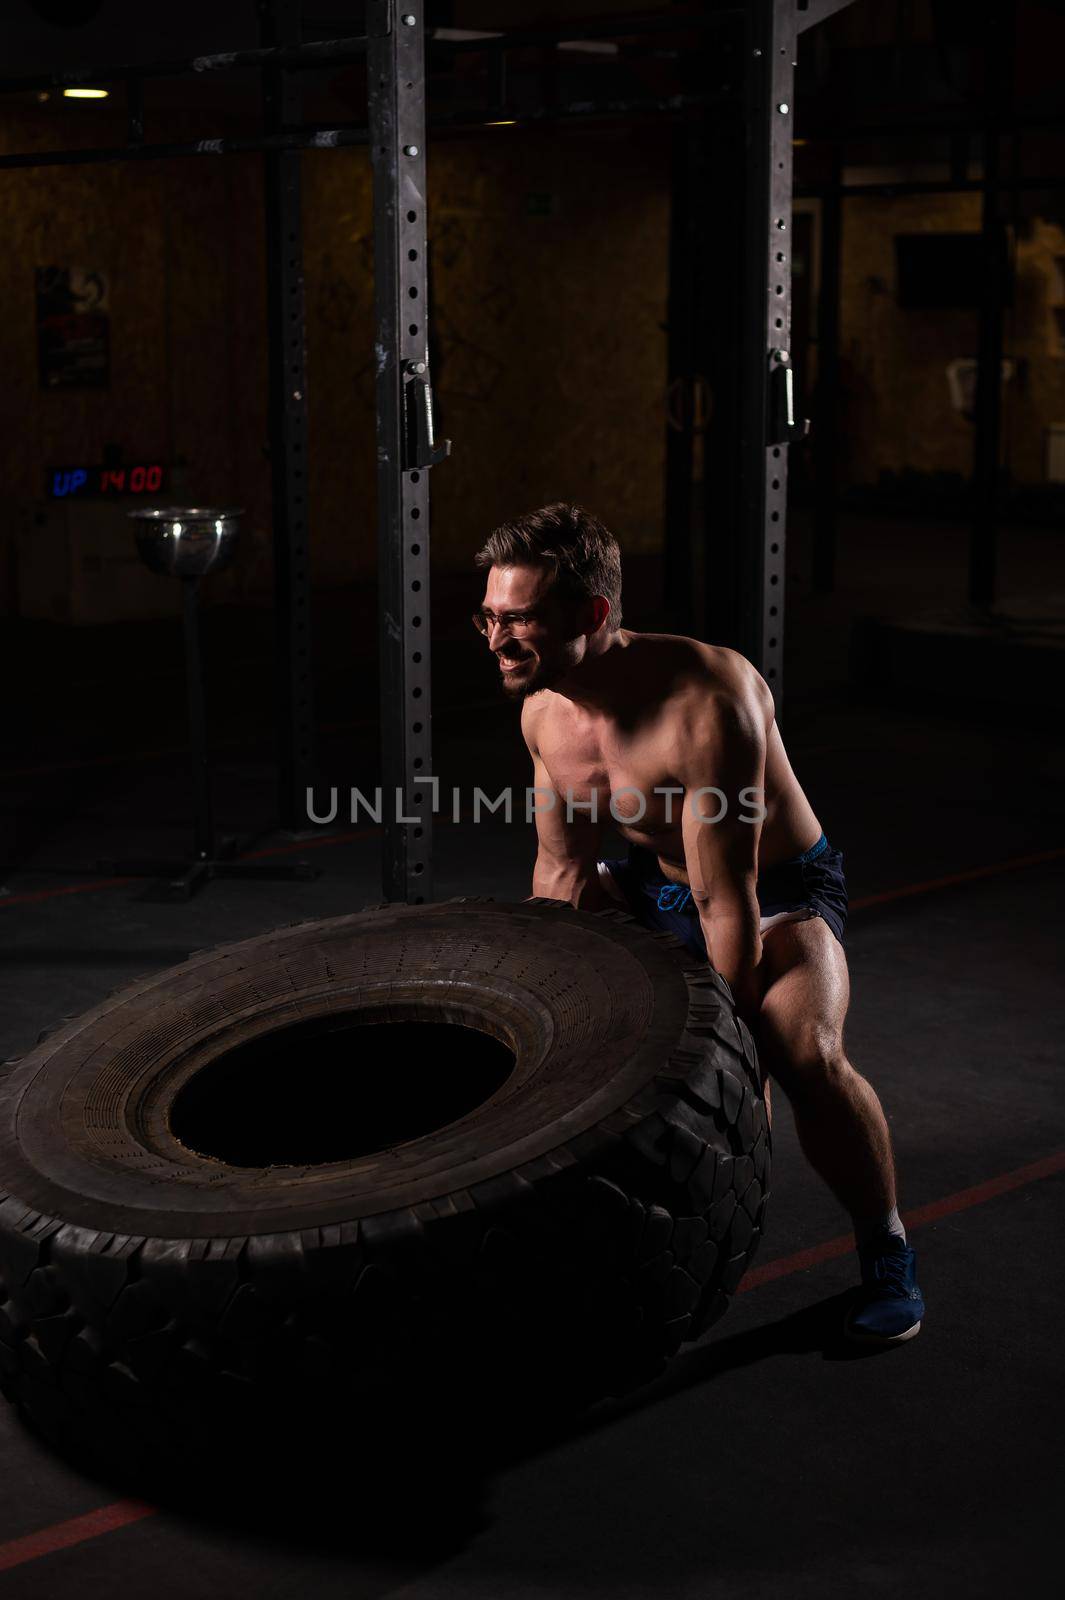 Caucasian man pushing a car tire in the gym. by mrwed54